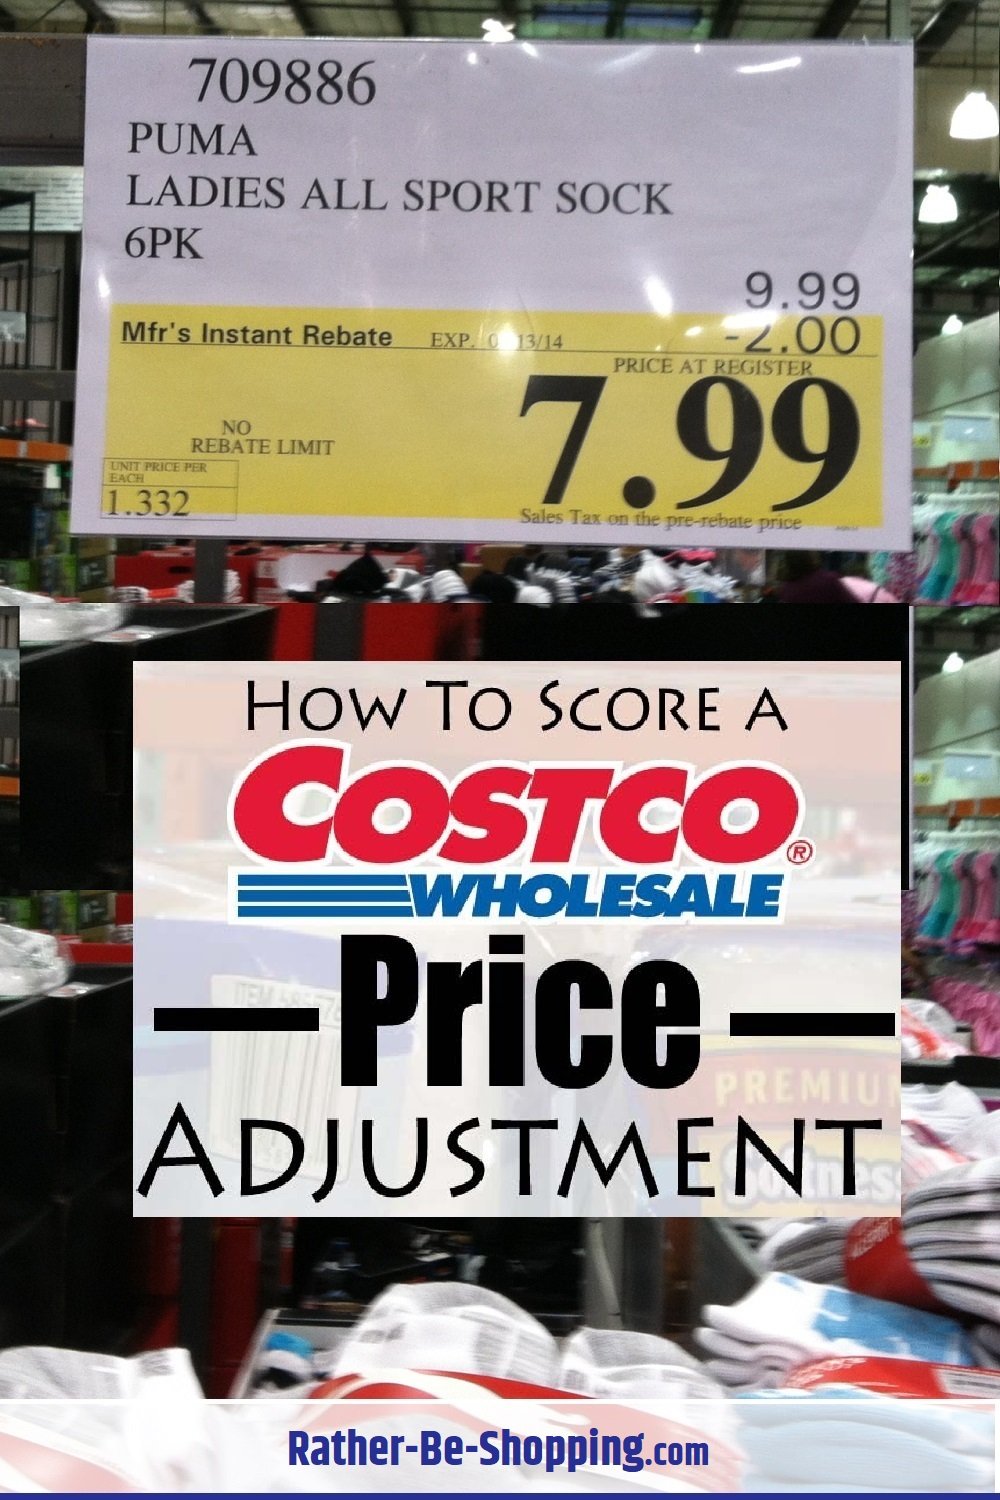 Costco's Price Adjustment Policy: Everything You Need to Know to Make It Happen